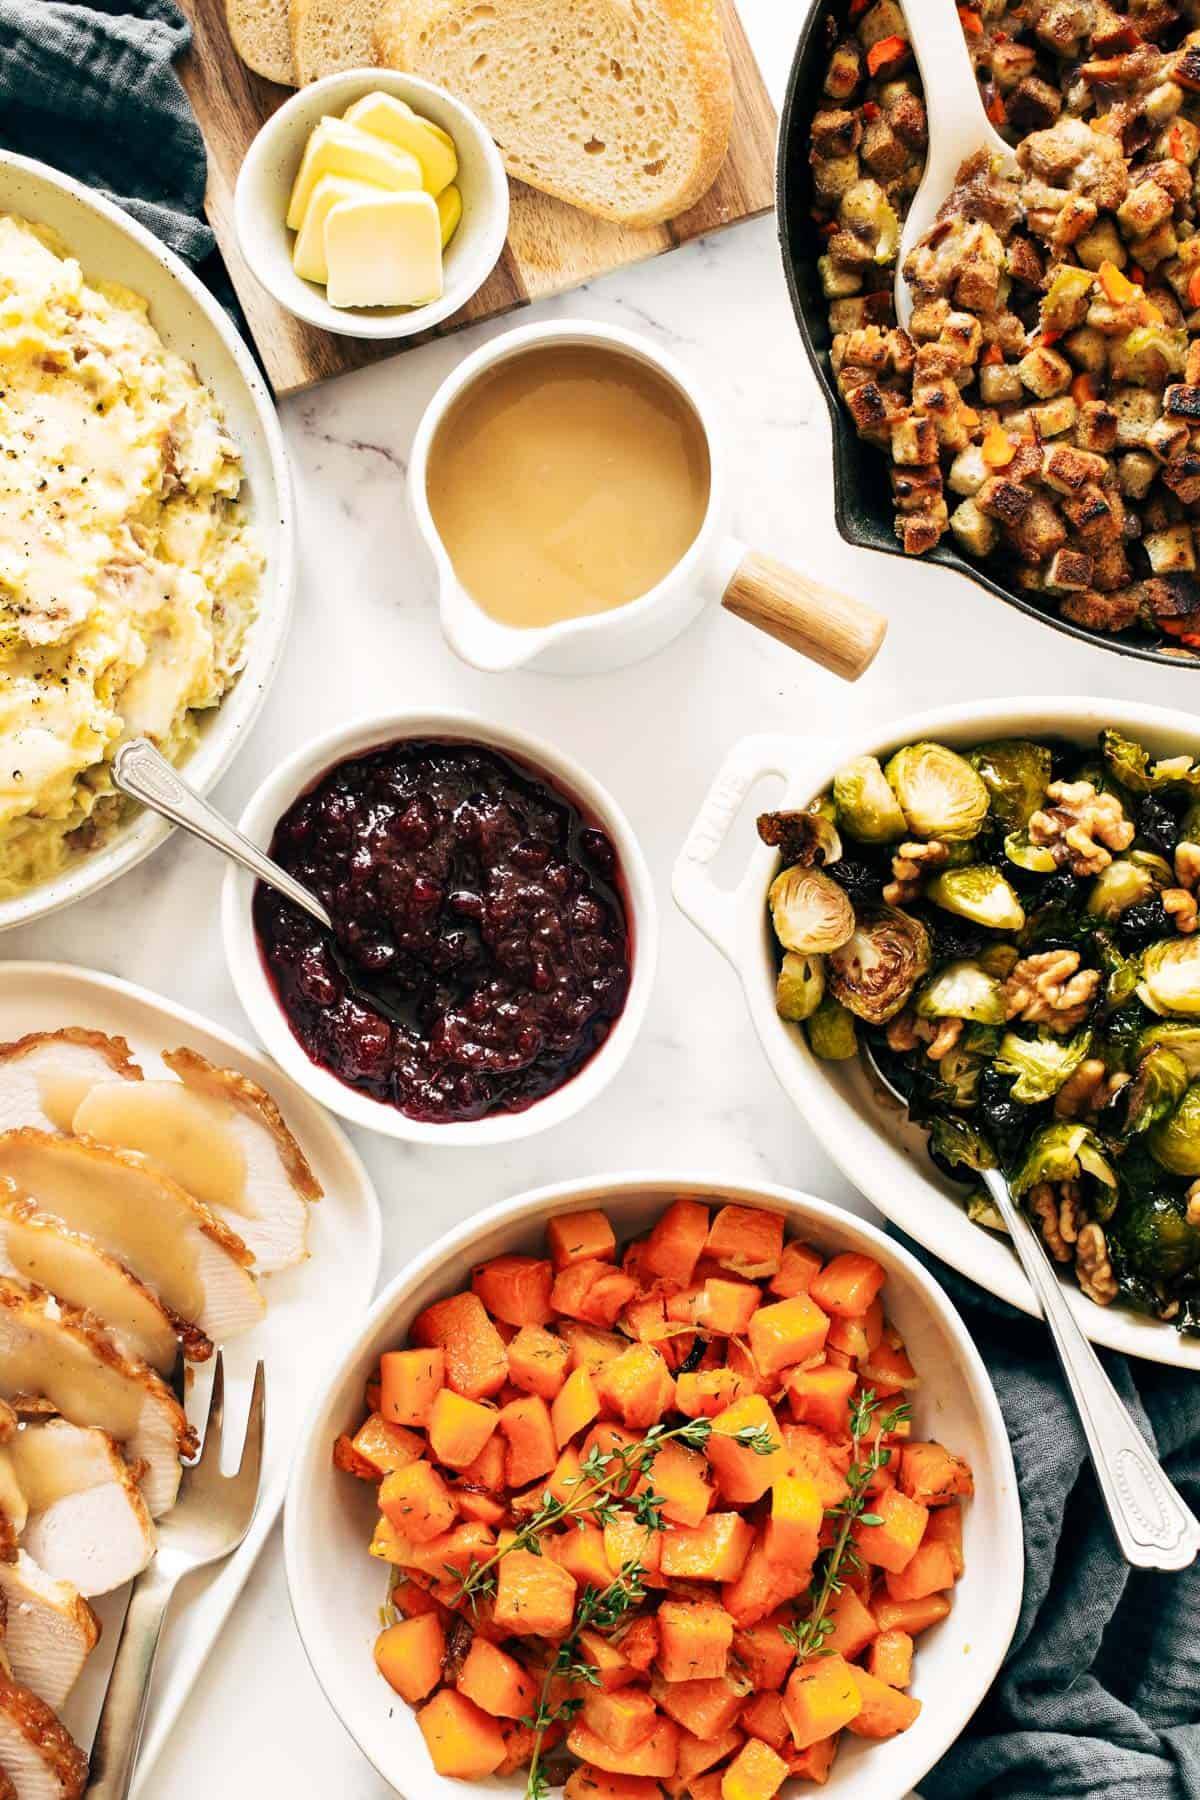 Thanksgiving spread with stuffing, gravy, cranberries, squash, turkey brussels sprouts, and potatoes.